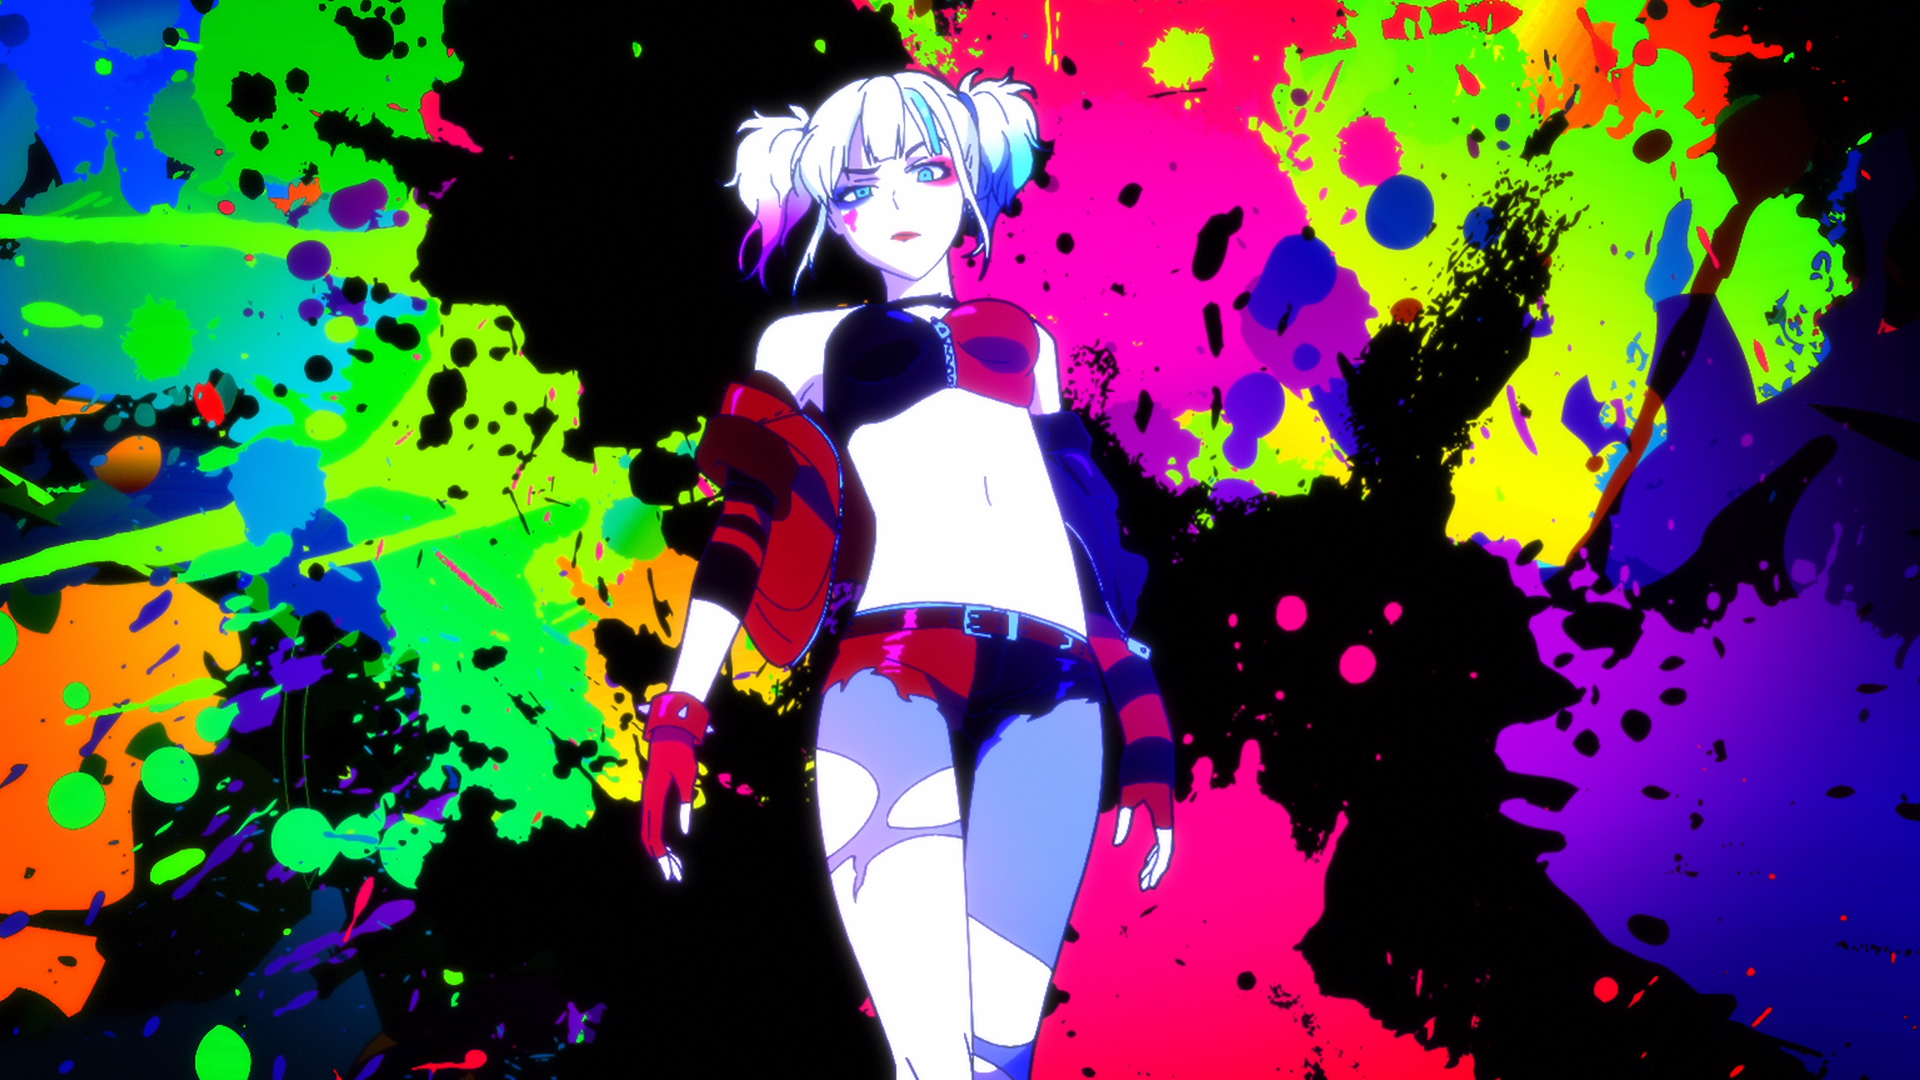 TV-Anime-Suicide-Squad-ISEKAI-ED-video-cut-04 Mori Calliope’s “Go-Getters” from Suicide Squad ISEKAI Now Streaming! Non-Credit Ending Video Pre-Released Ahead of Anime Broadcast!